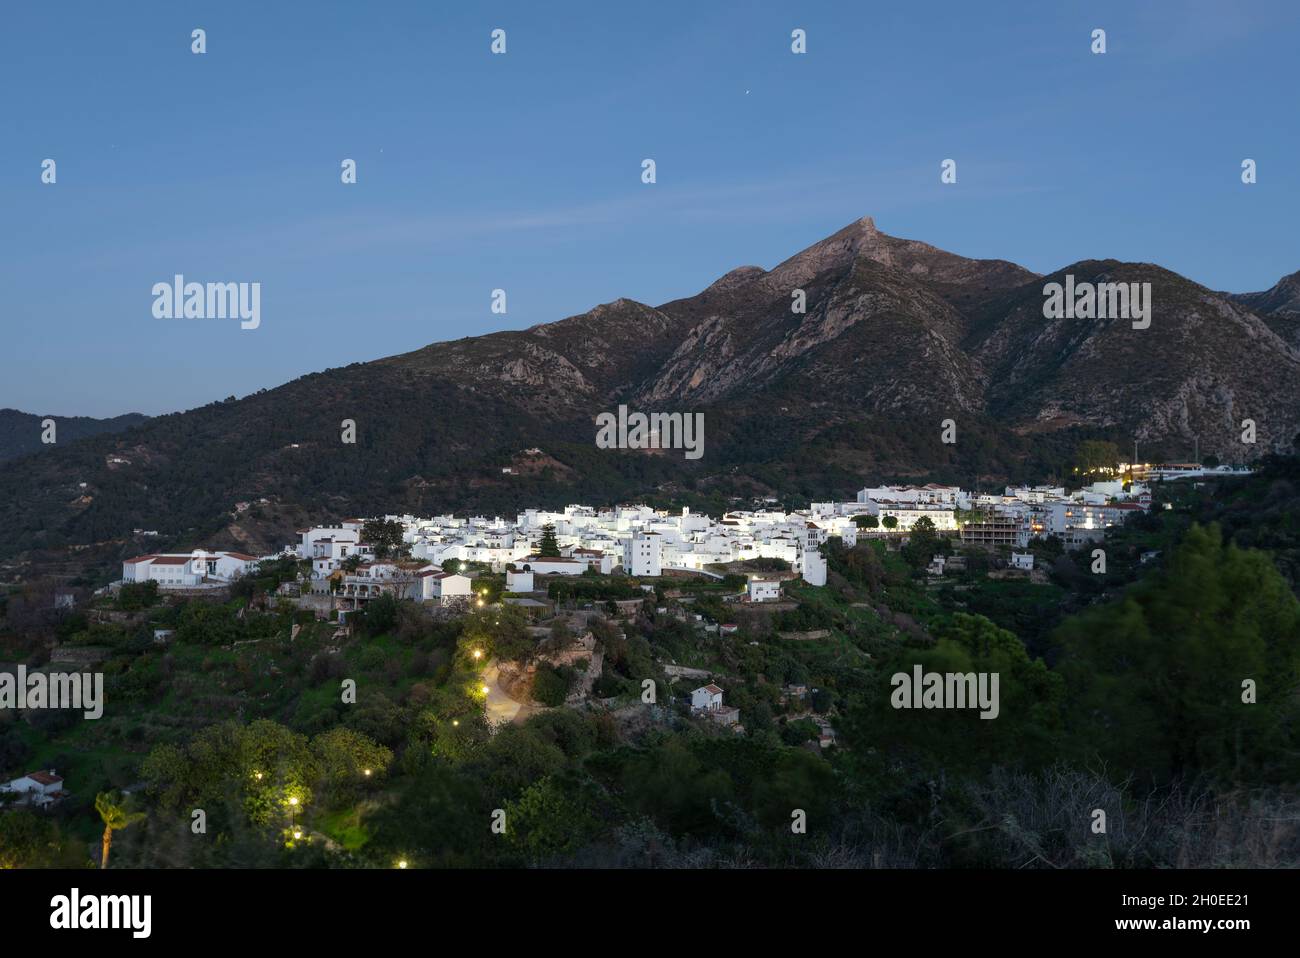 Istan at dusk - a town in the province of Malaga in Andalusia, Spain Stock Photo